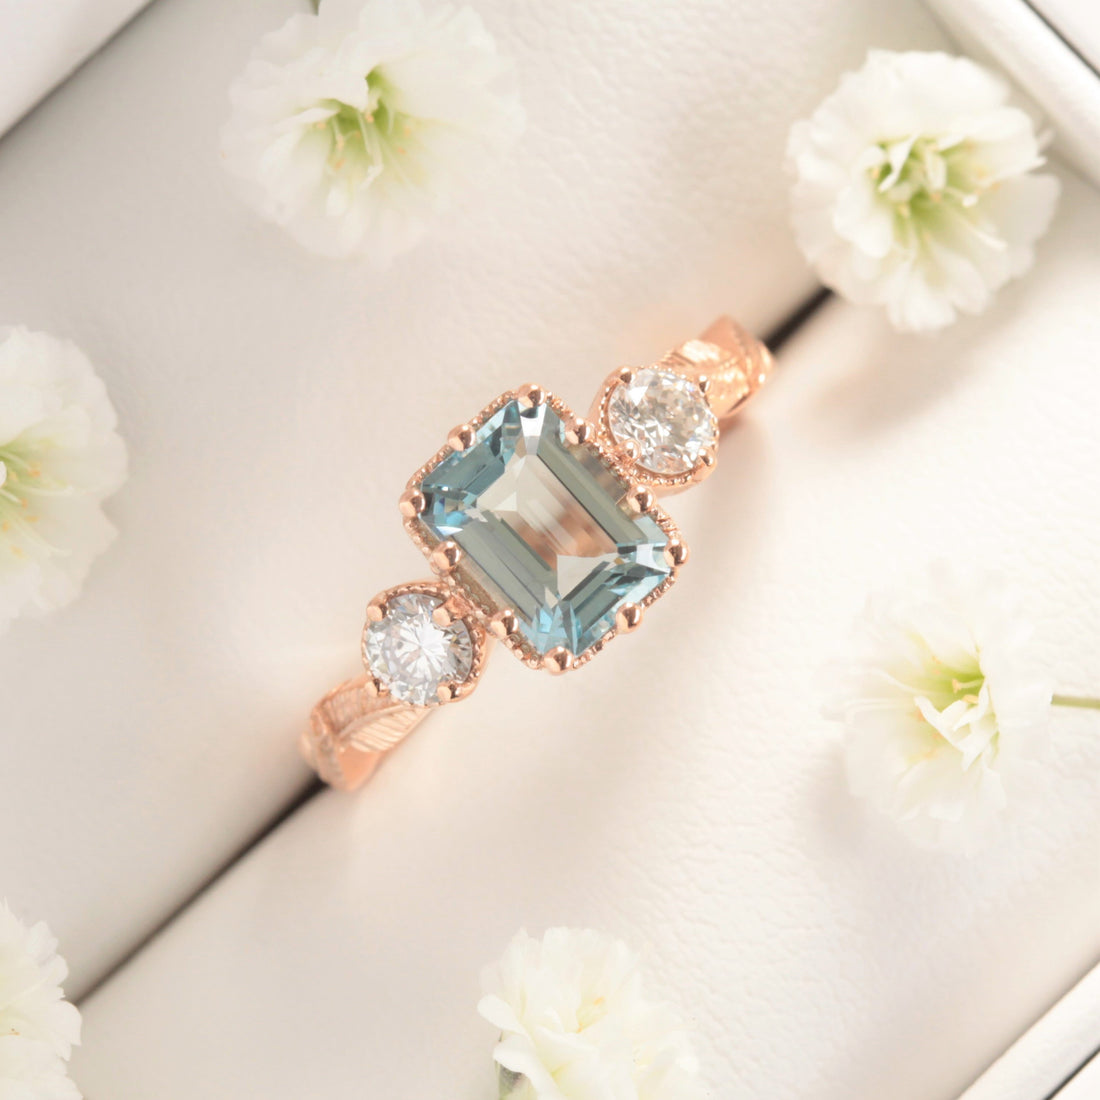 aquamarine and diamond nature engagement ring with leaves